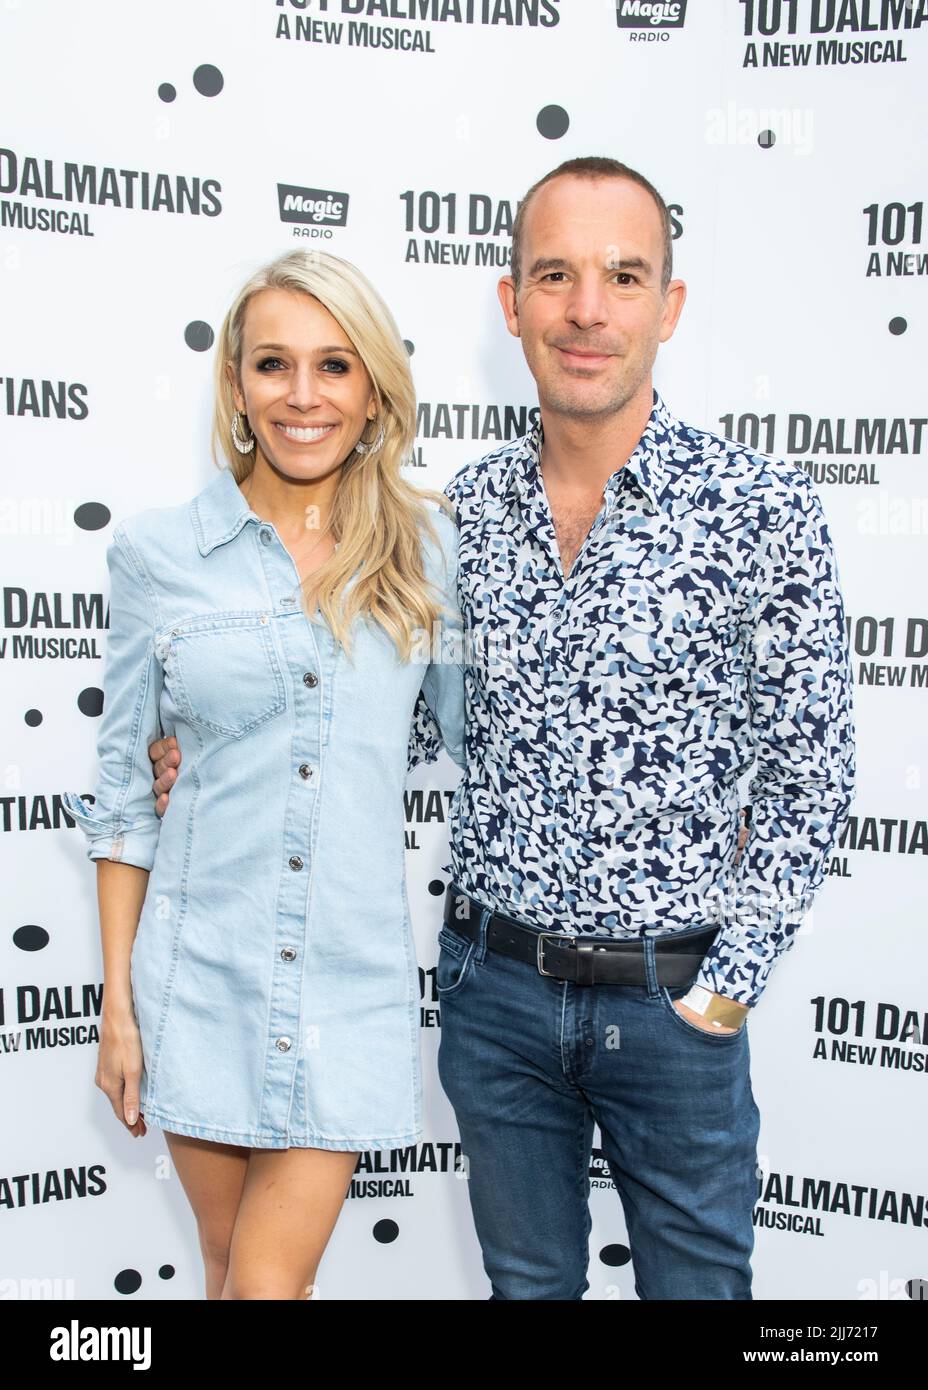 London, UK, Friday, 22nd July 2022 Martin Lewis and wife Lara Lewington arrive at the 101 Dalmations Press night at the Regent’s Park Open Air Theatre. Credit: DavidJensen / Empics Entertainment / Alamy Live News Stock Photo